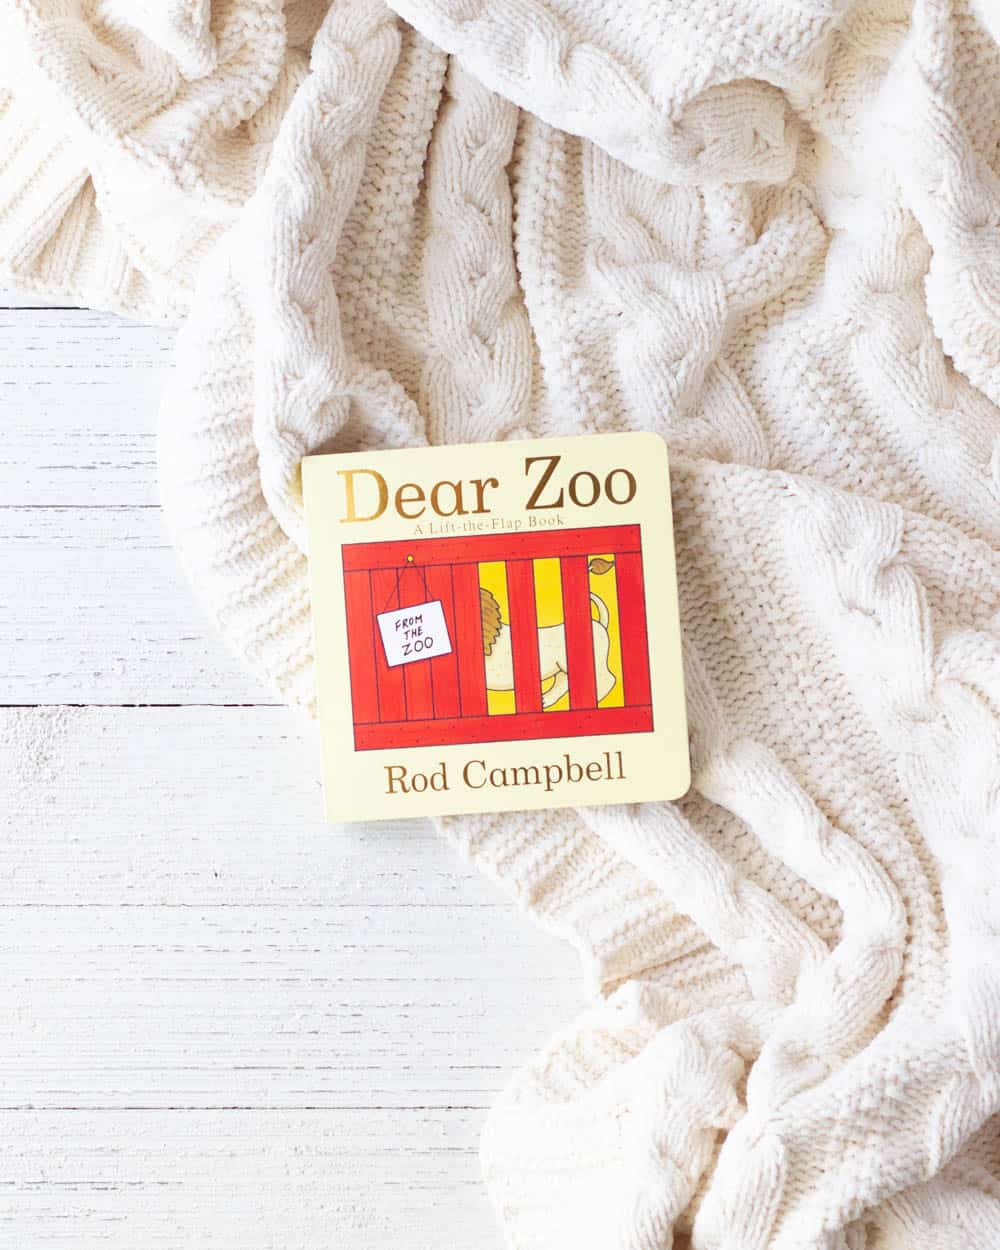 A board book copy of Dear Zoo by Rod Campbell on a wooden surface.